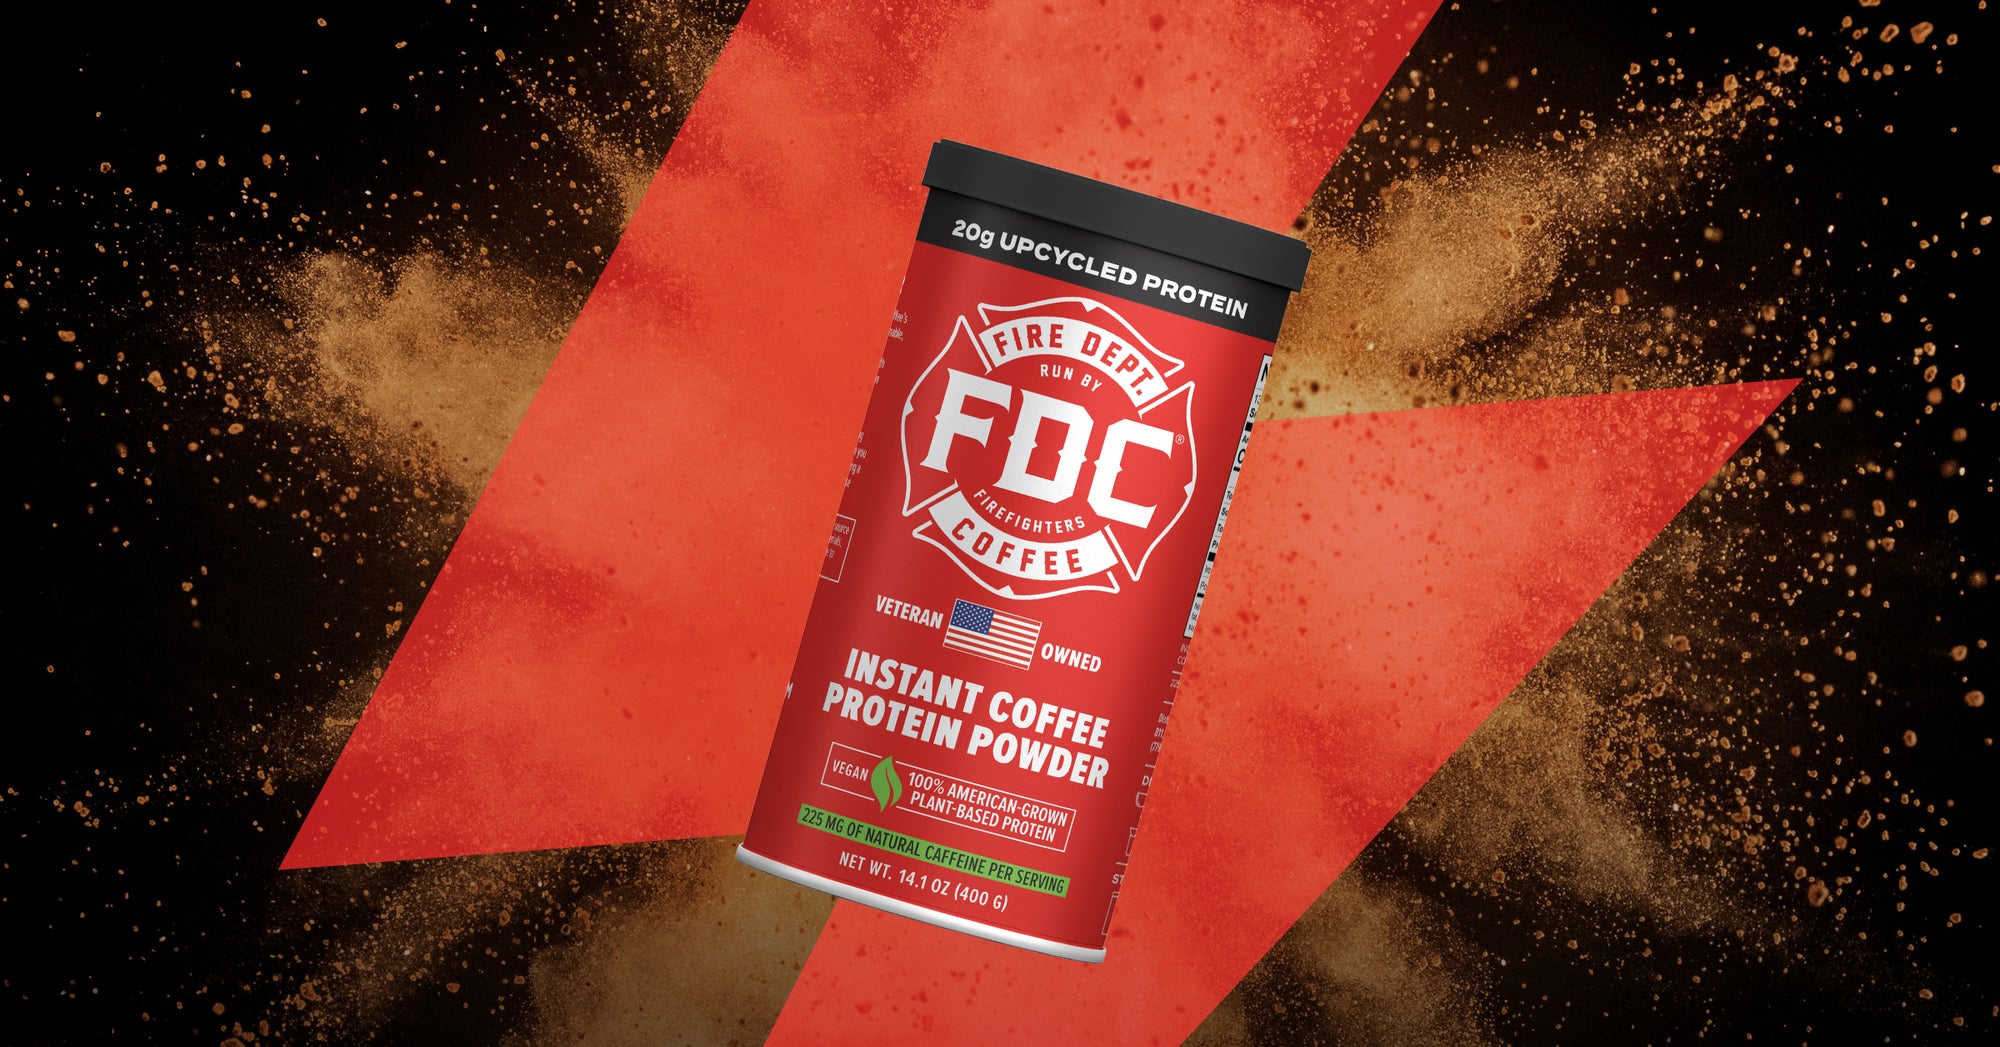 Can of Instant Coffee Protein Powder made by Fire Department Coffee.